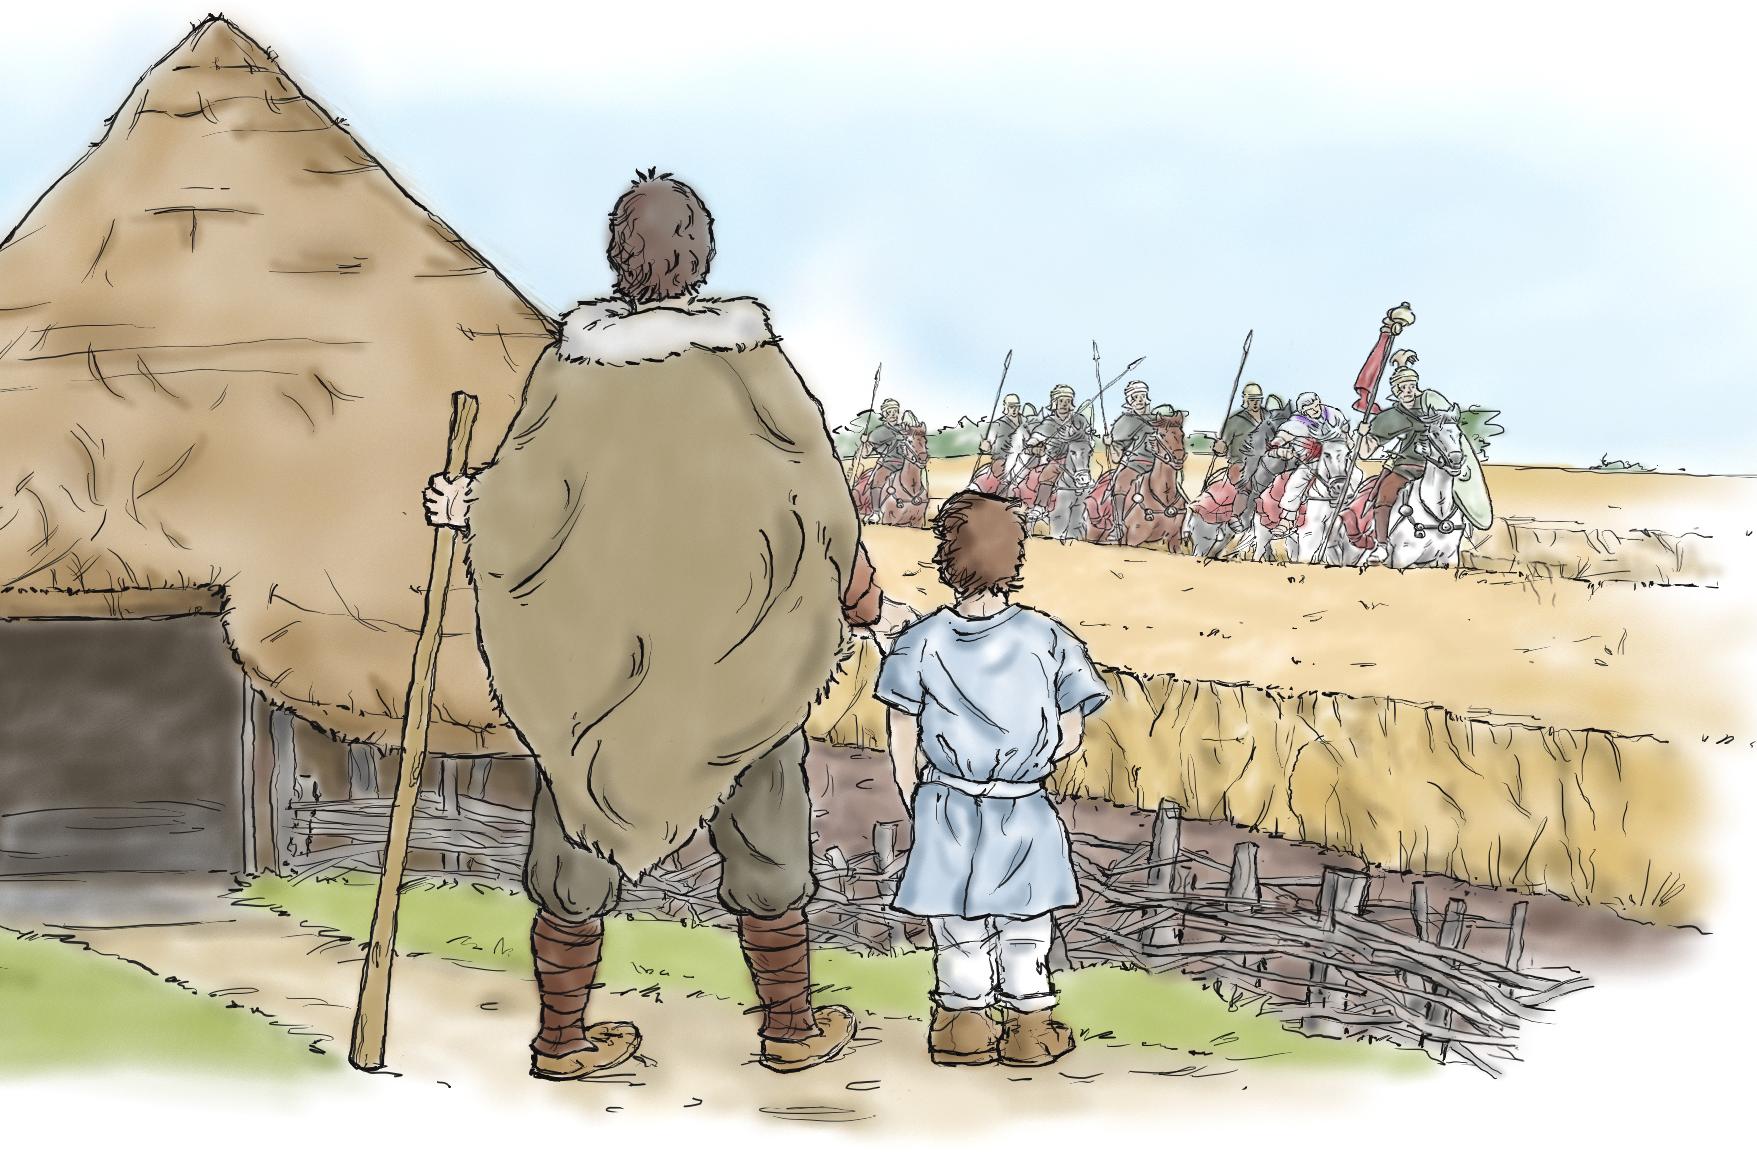 An illustration from Stage 13 of the new UK 5th Edition of Book II. The image shows a father and son watching Salvius arrive with Roman troops on horseback.